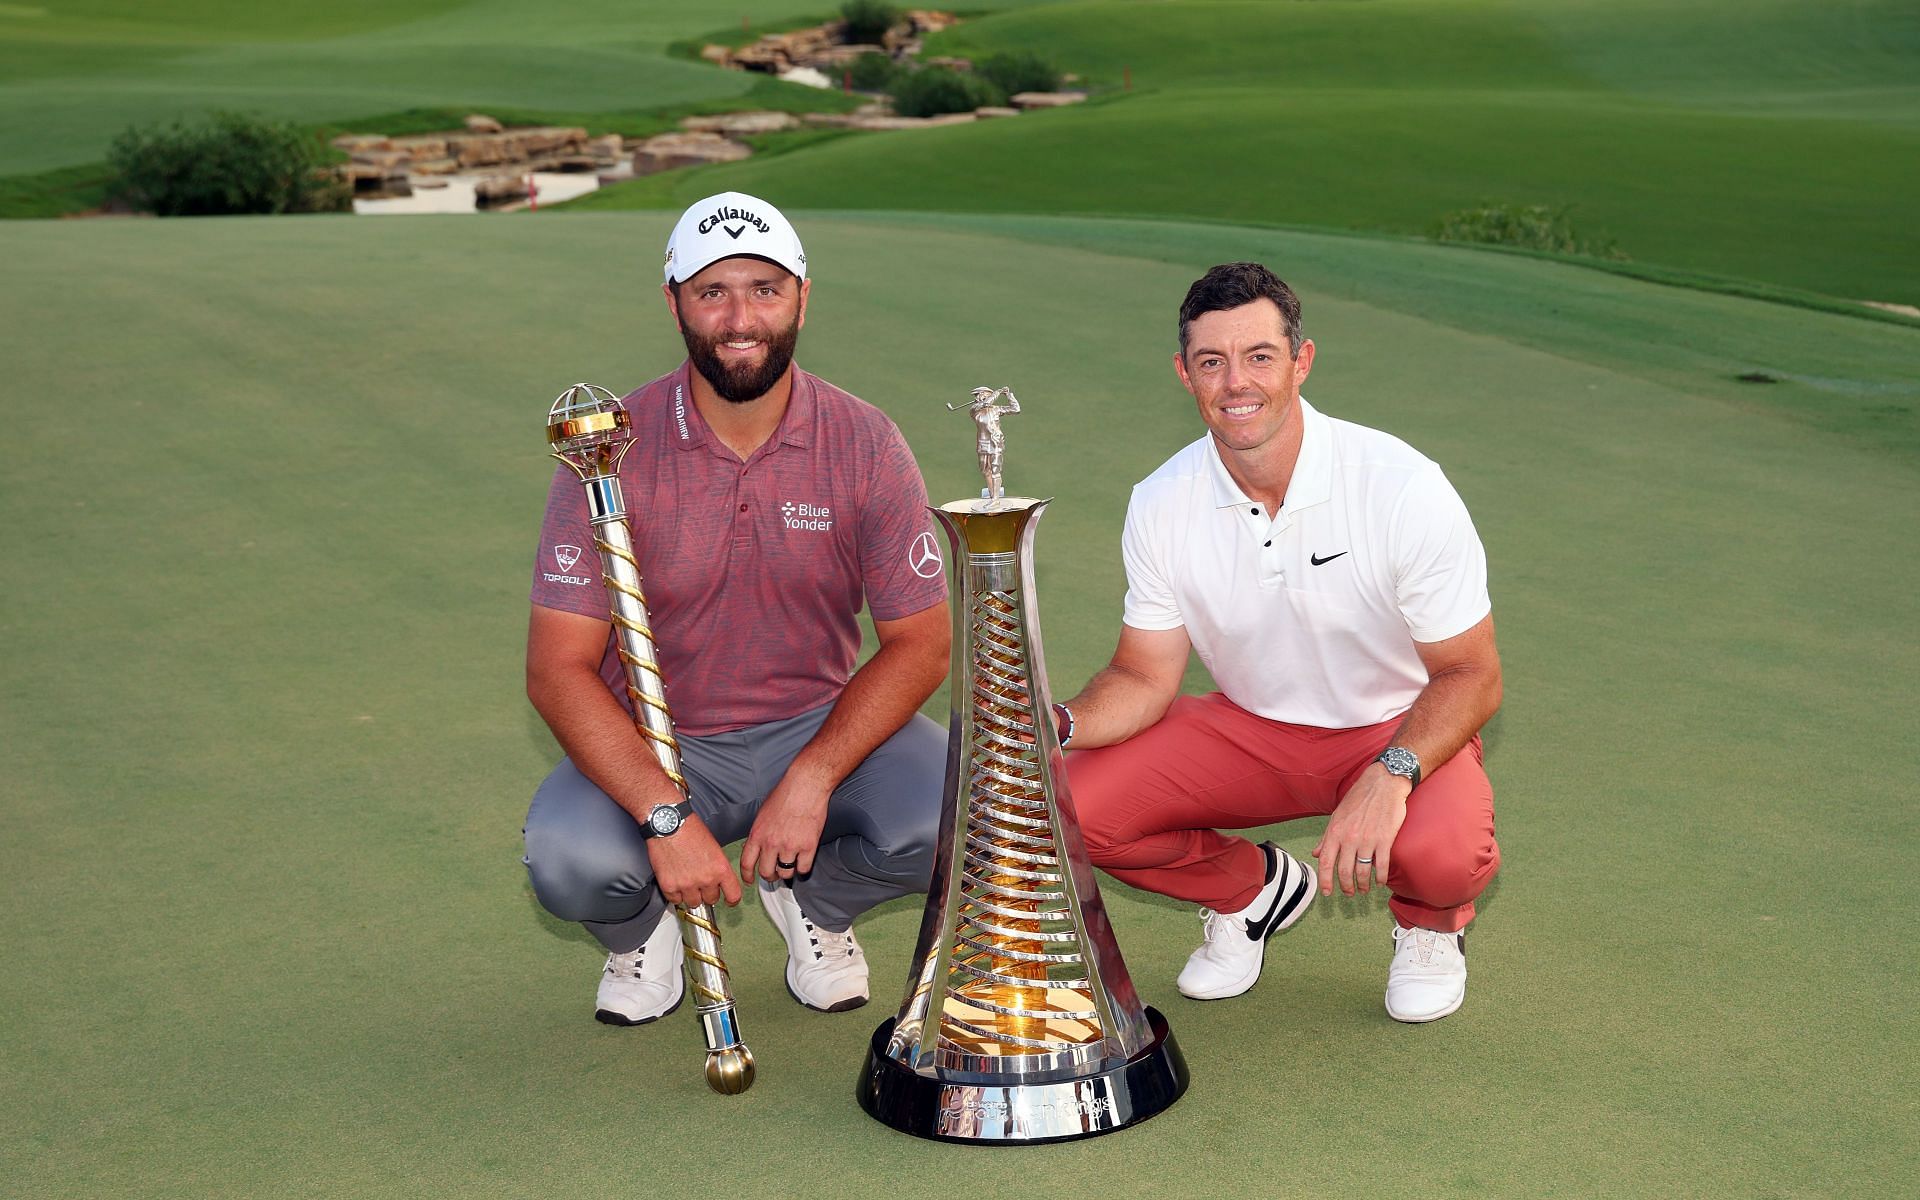 DP World Tour European Open Schedule, timings, top players, prize